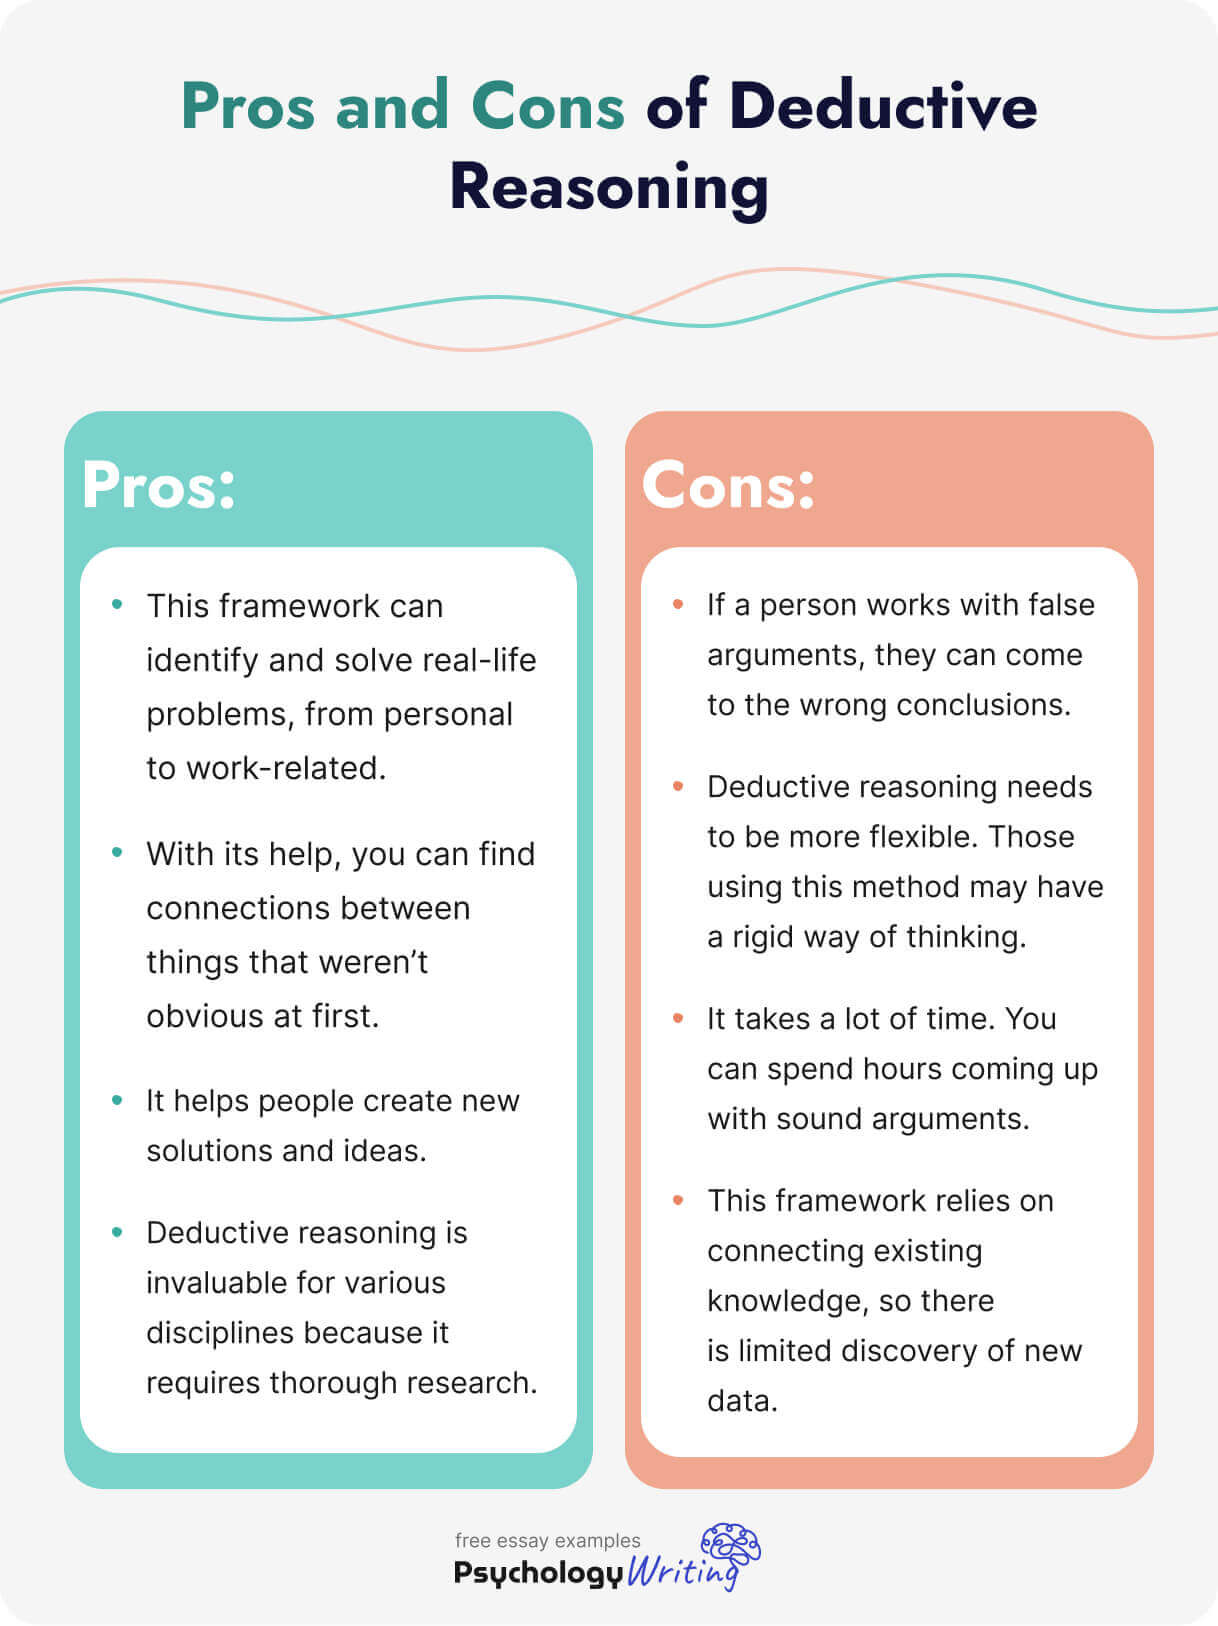 A list of pros and cons of deductive reasoning.